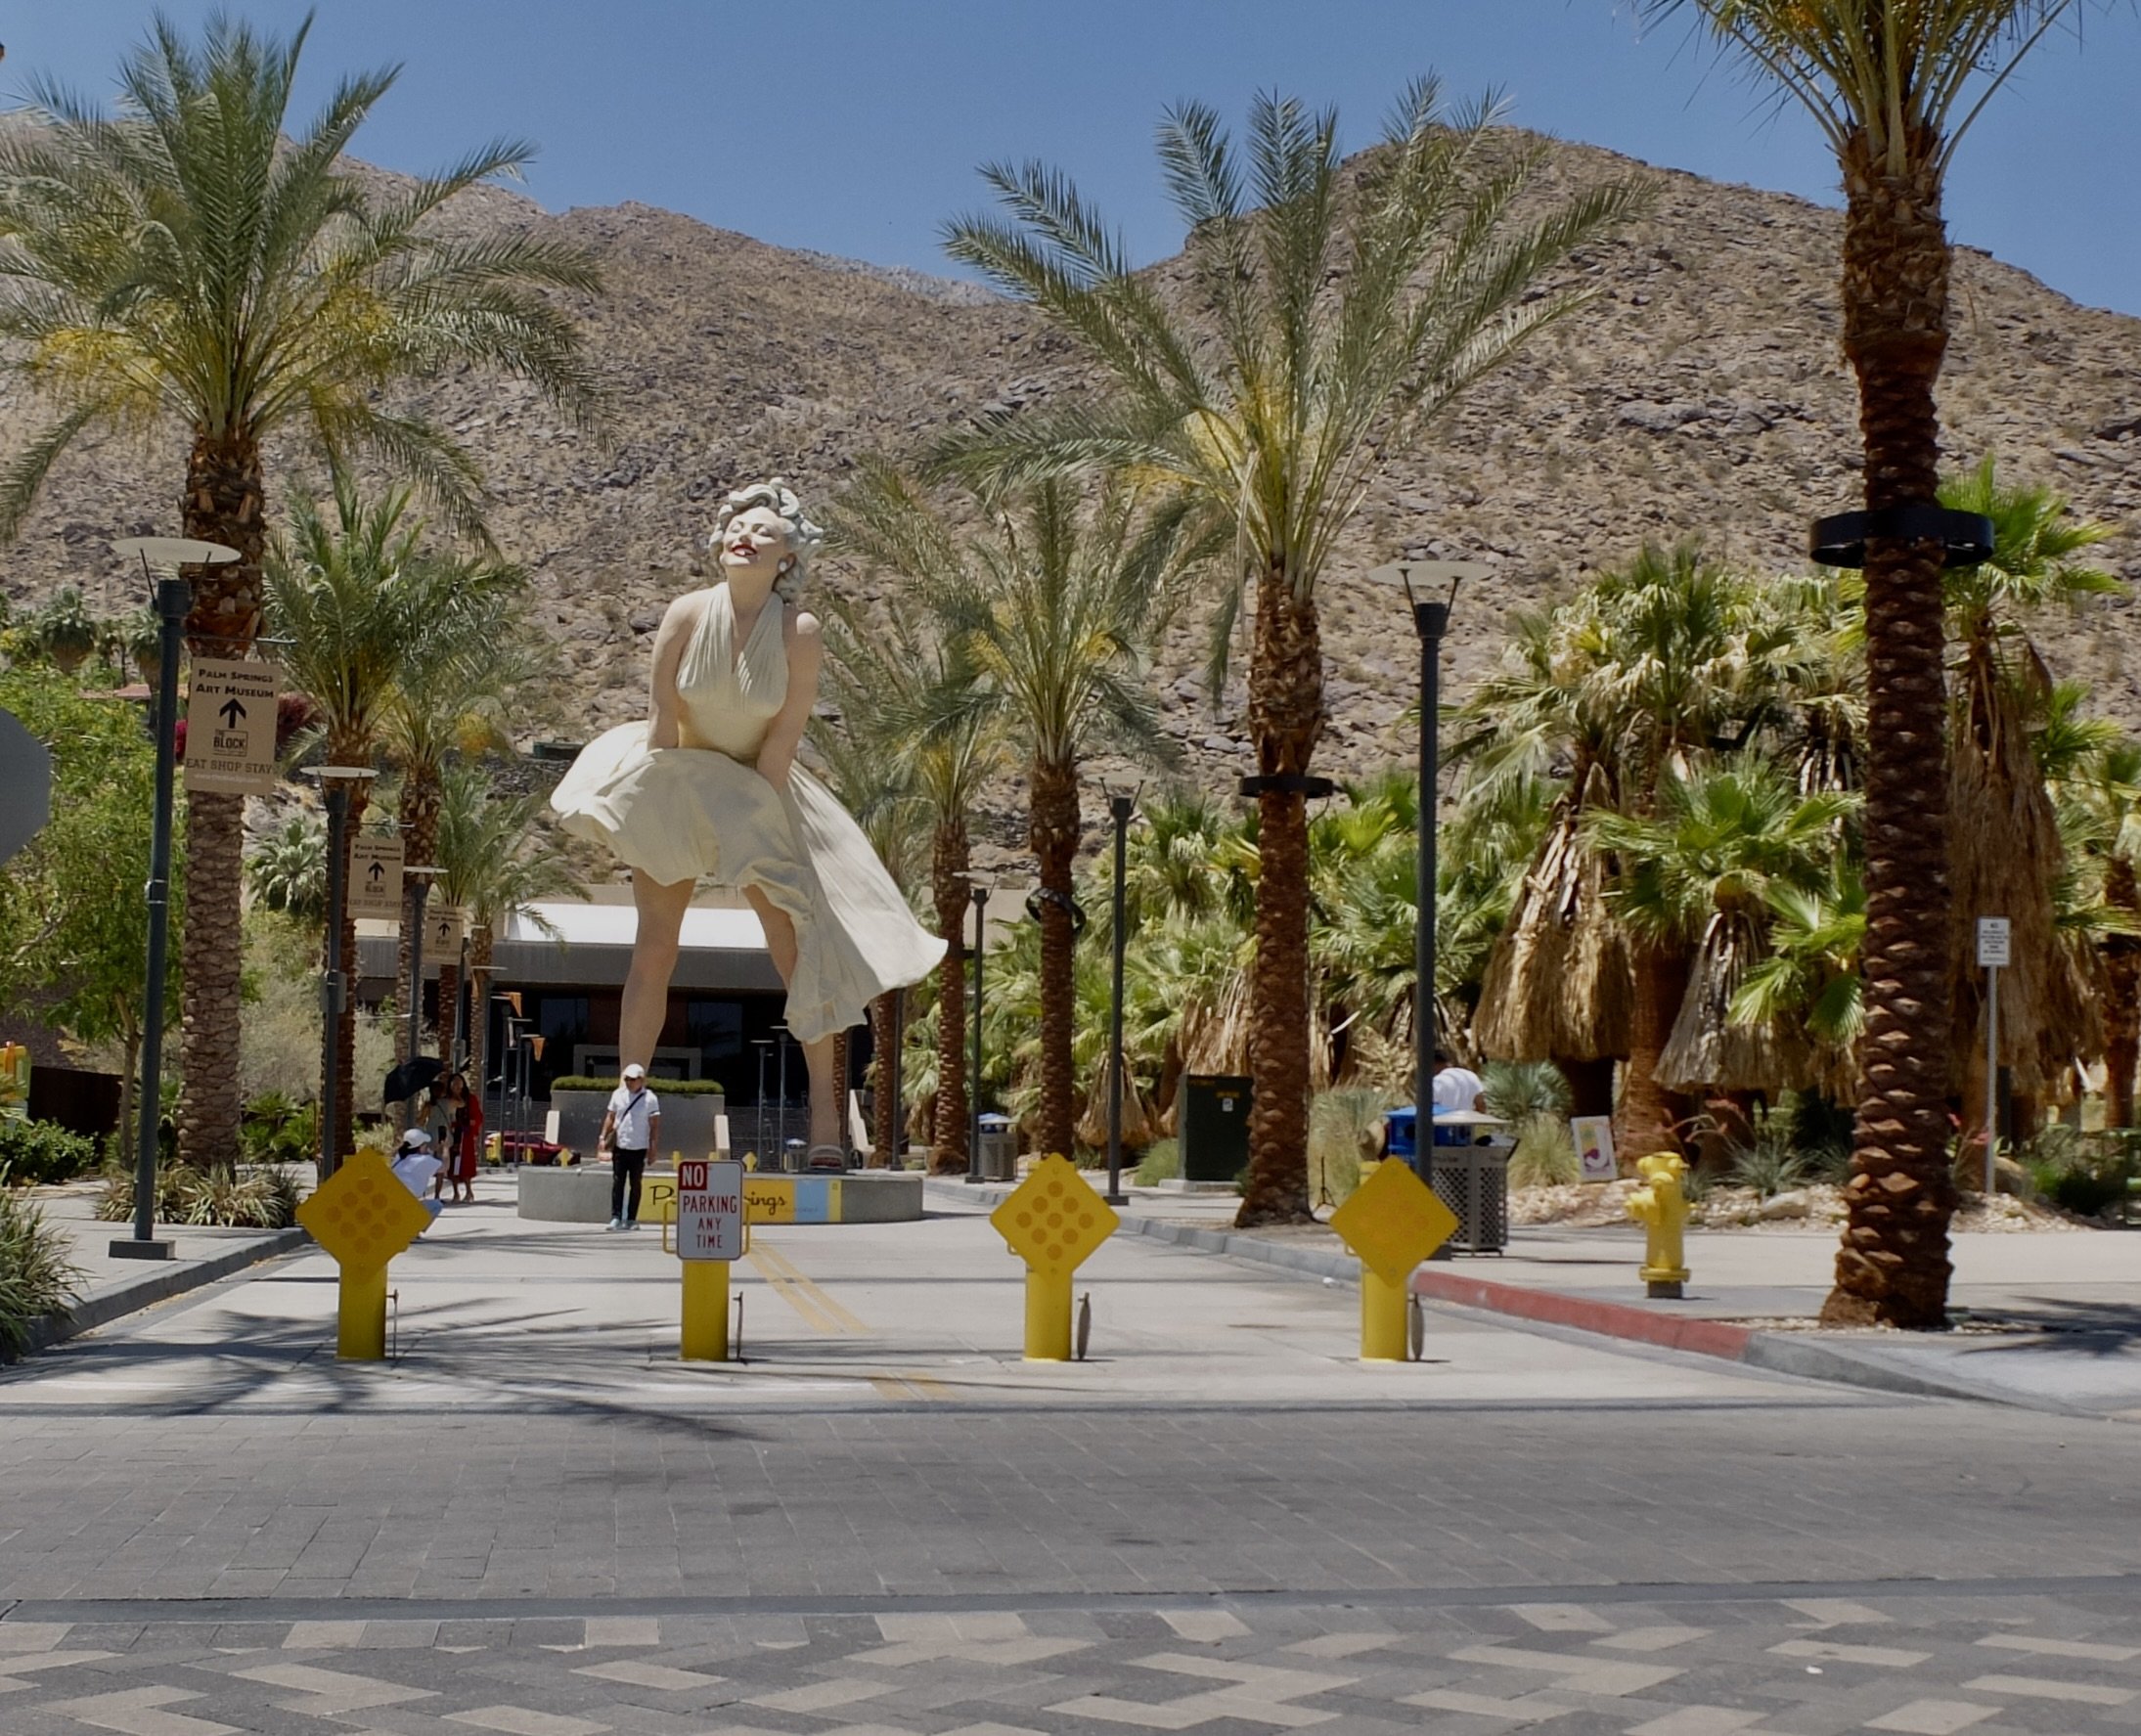 "Forever Marilyn" in front of the Palm Springs Art Museum c. 2011 by Seward Johnson. Returned to Palm Springs in 2021.